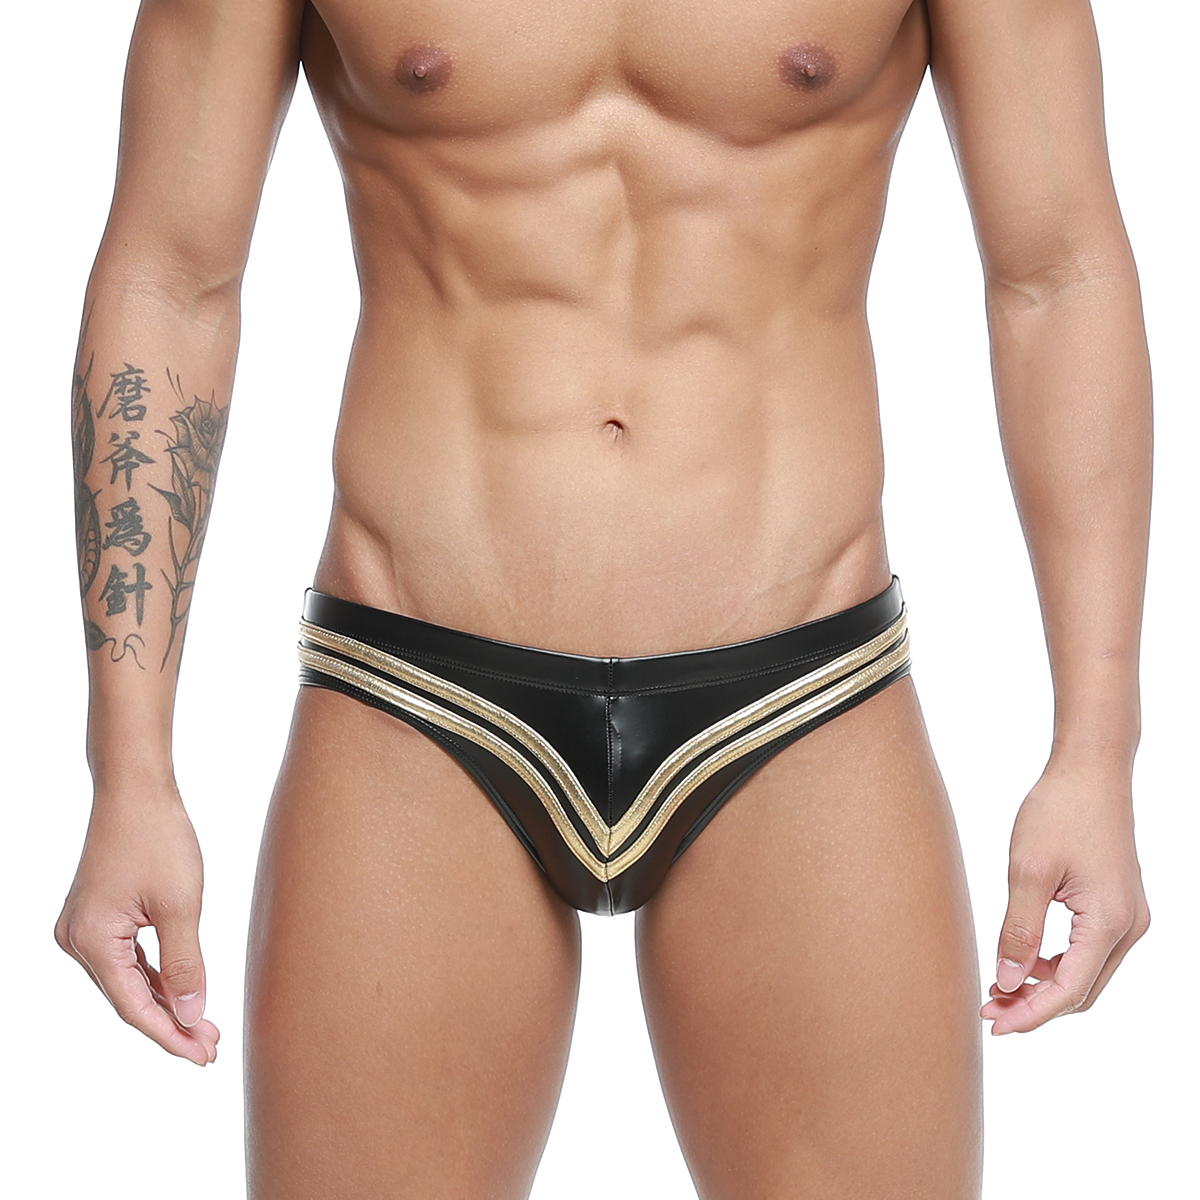 [MetroMuscleWear] Ajax Competition Suit Gold (4974-47)